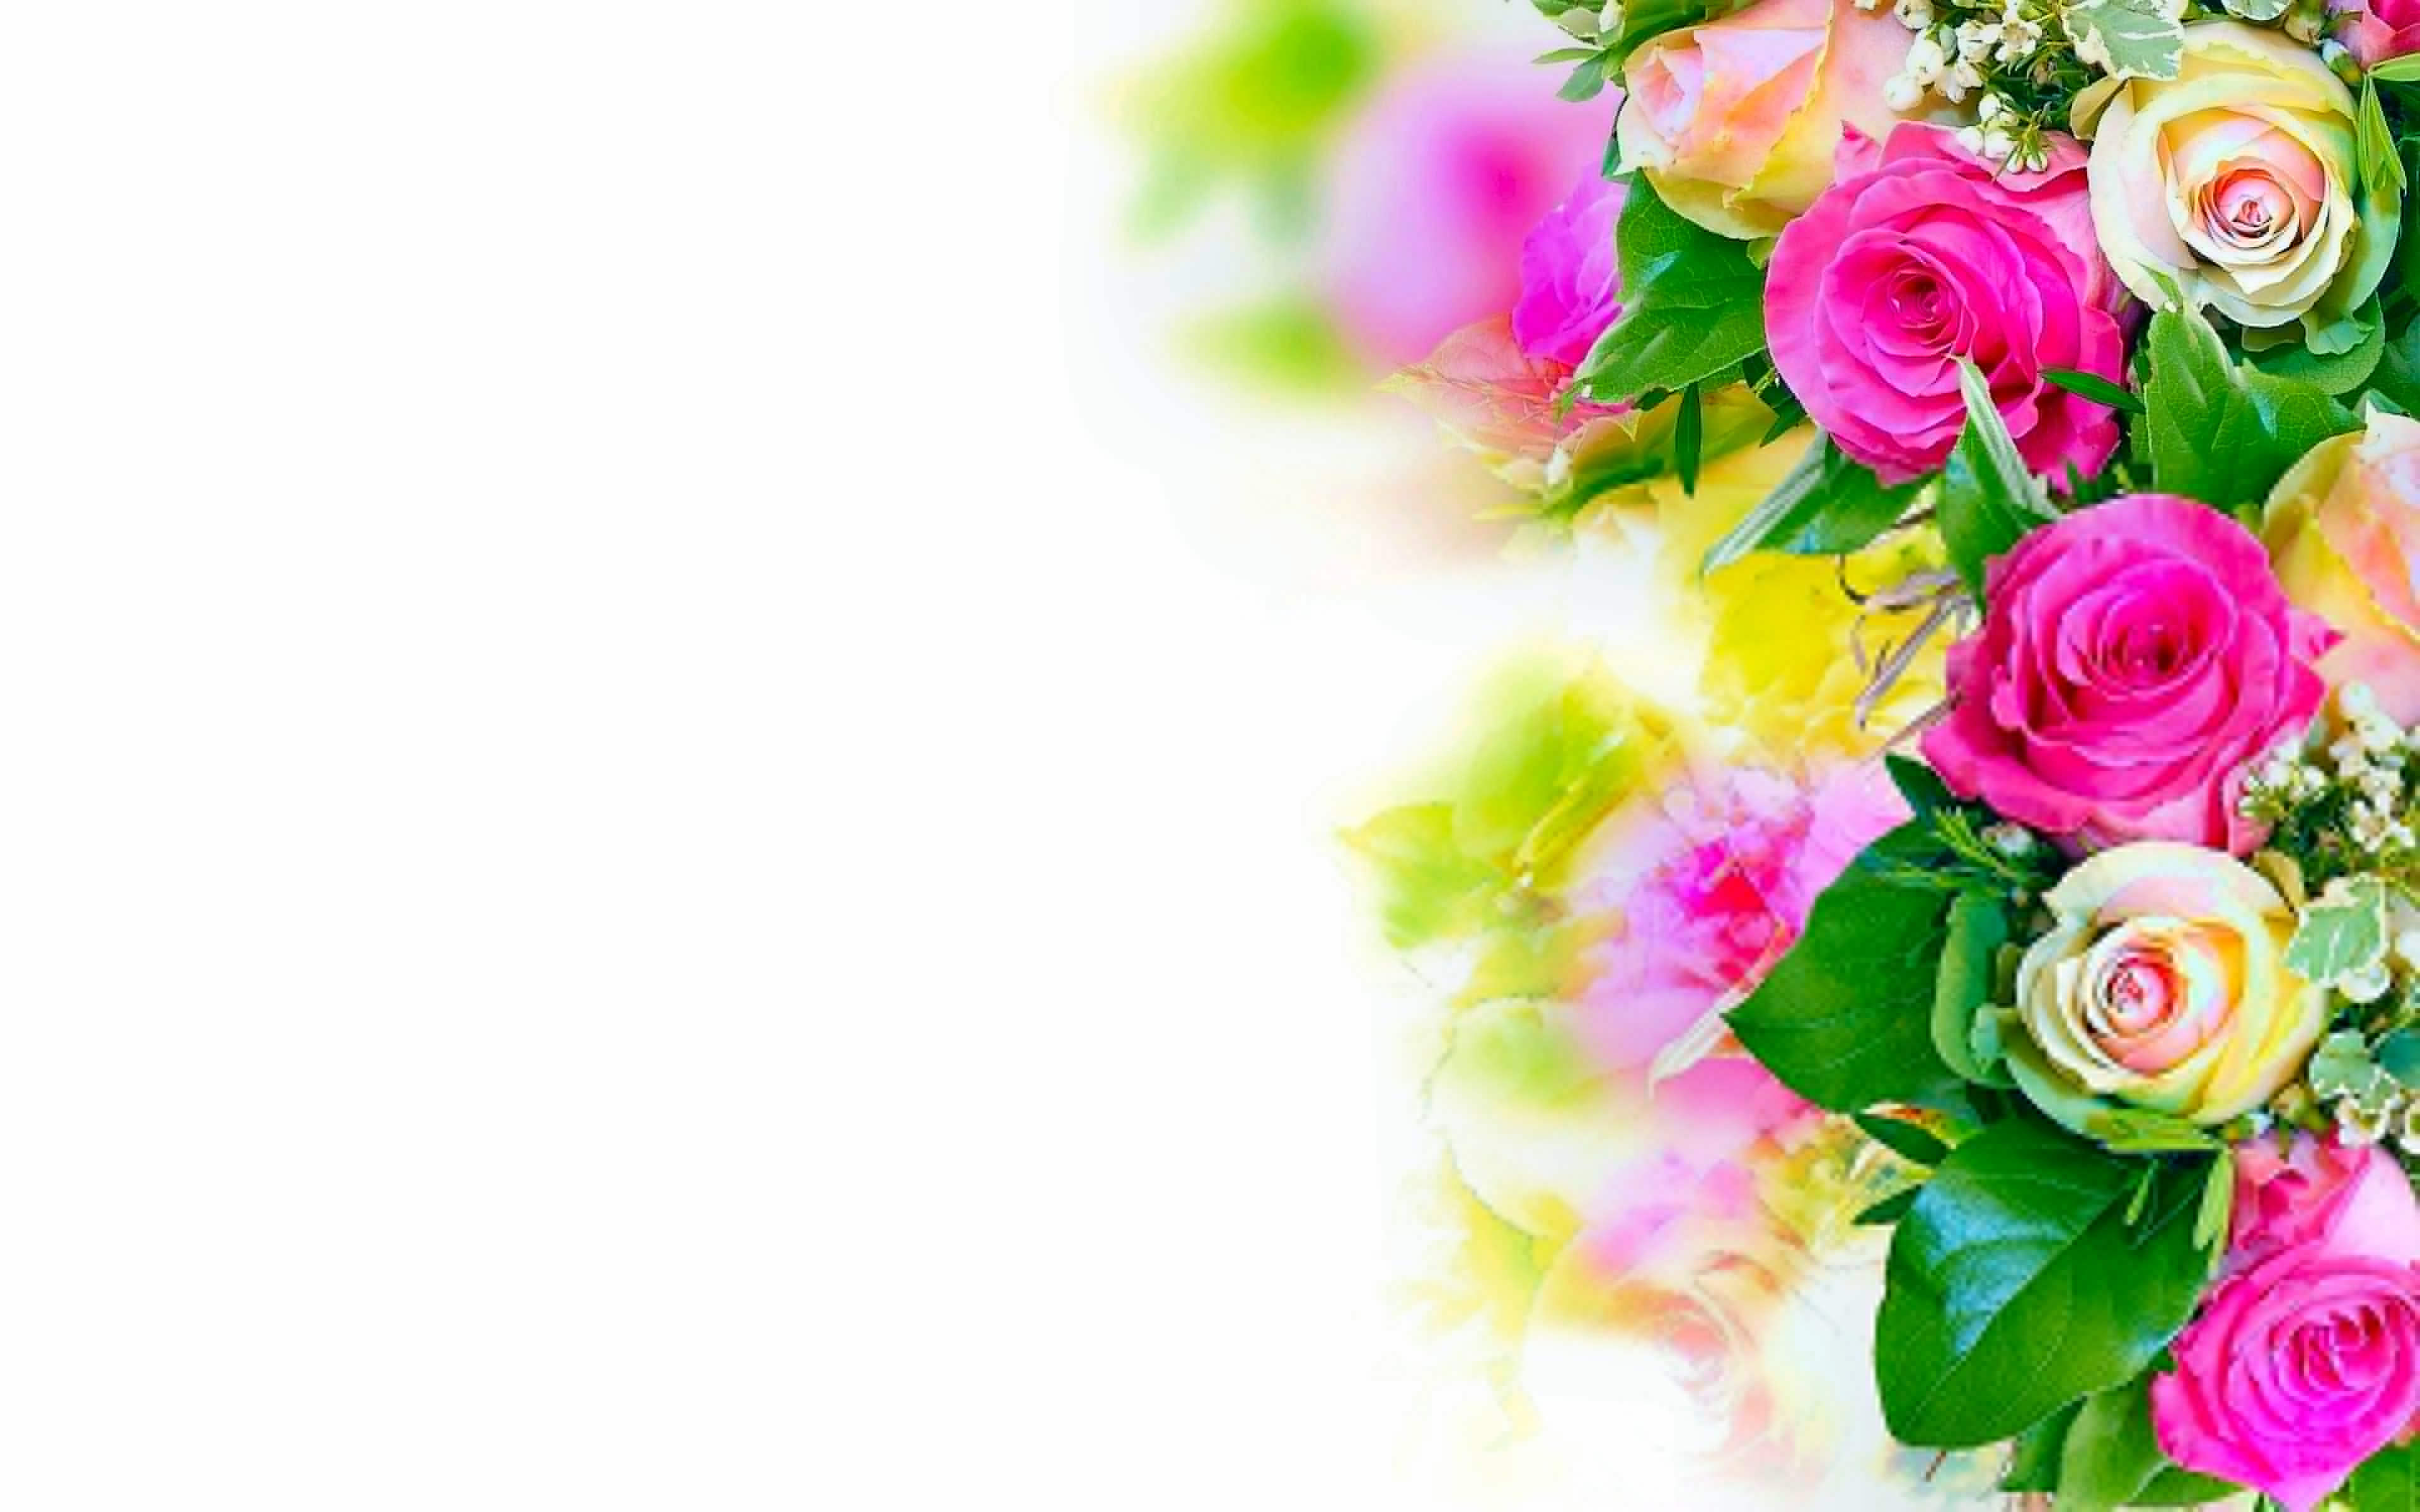 25 Roses Background Wallpapers Images Pictures